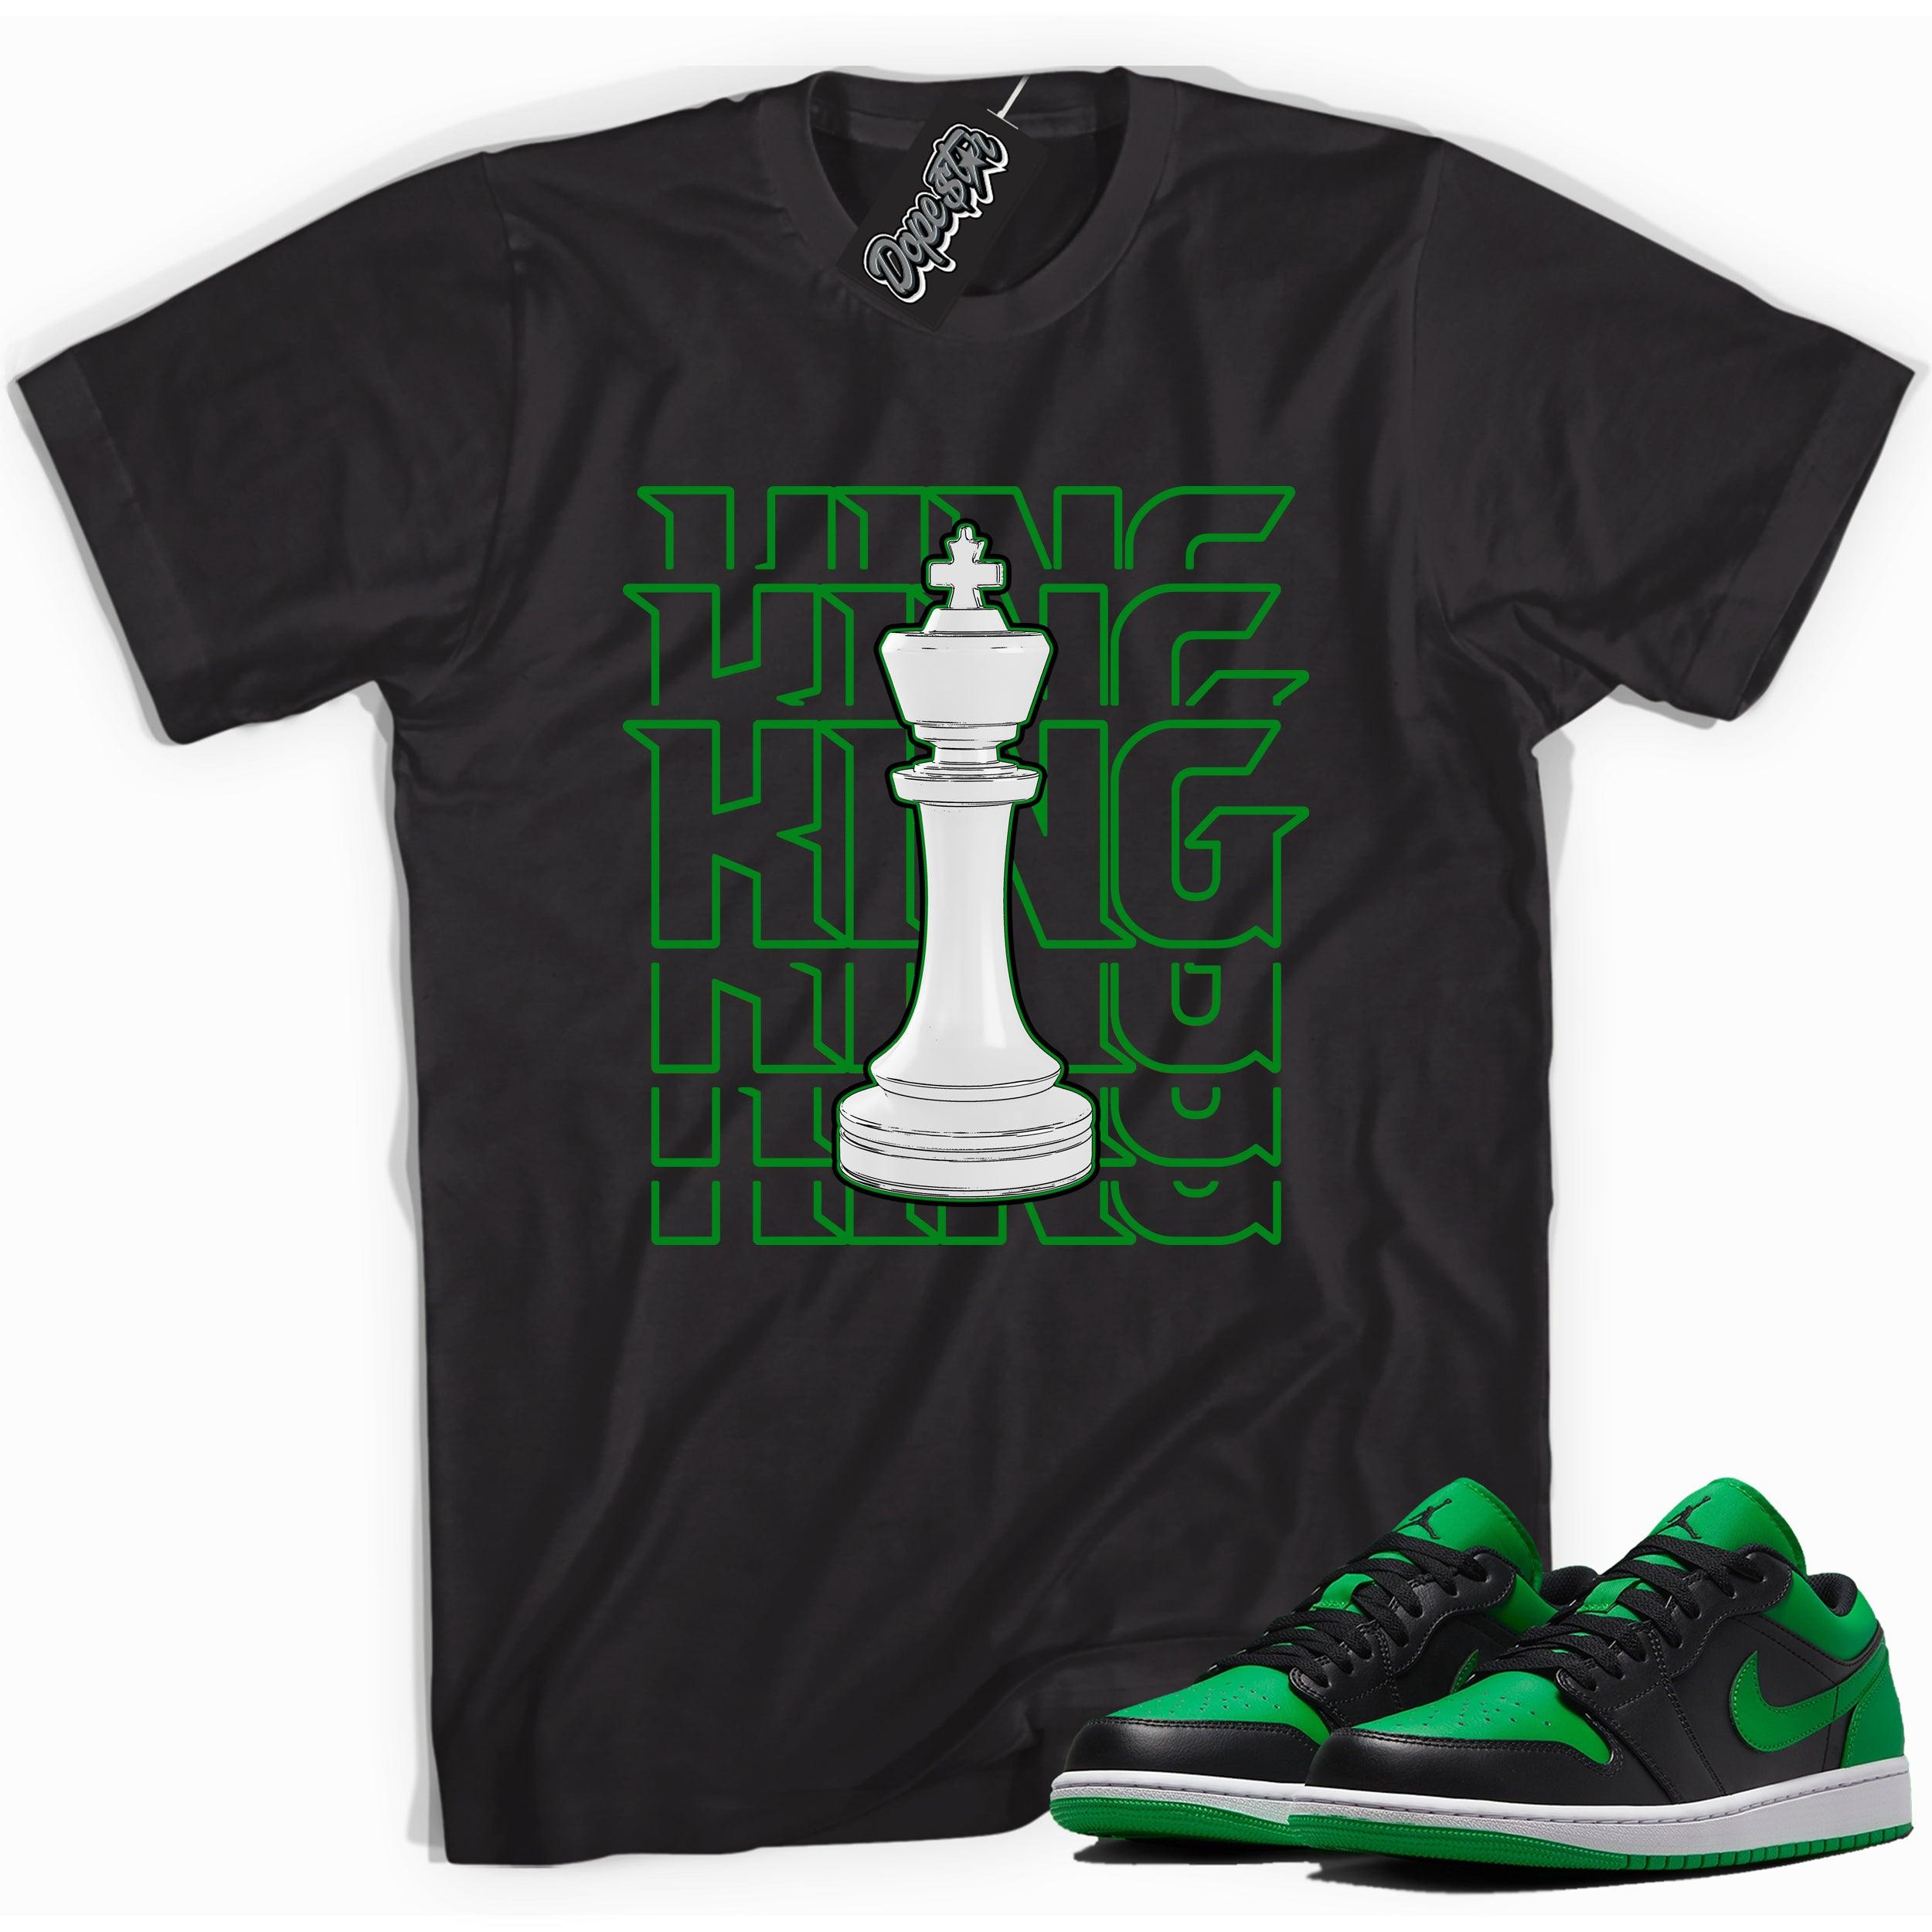 Cool black graphic tee with 'King' print, that perfectly matches Air Jordan 1 Low Lucky Green sneakers